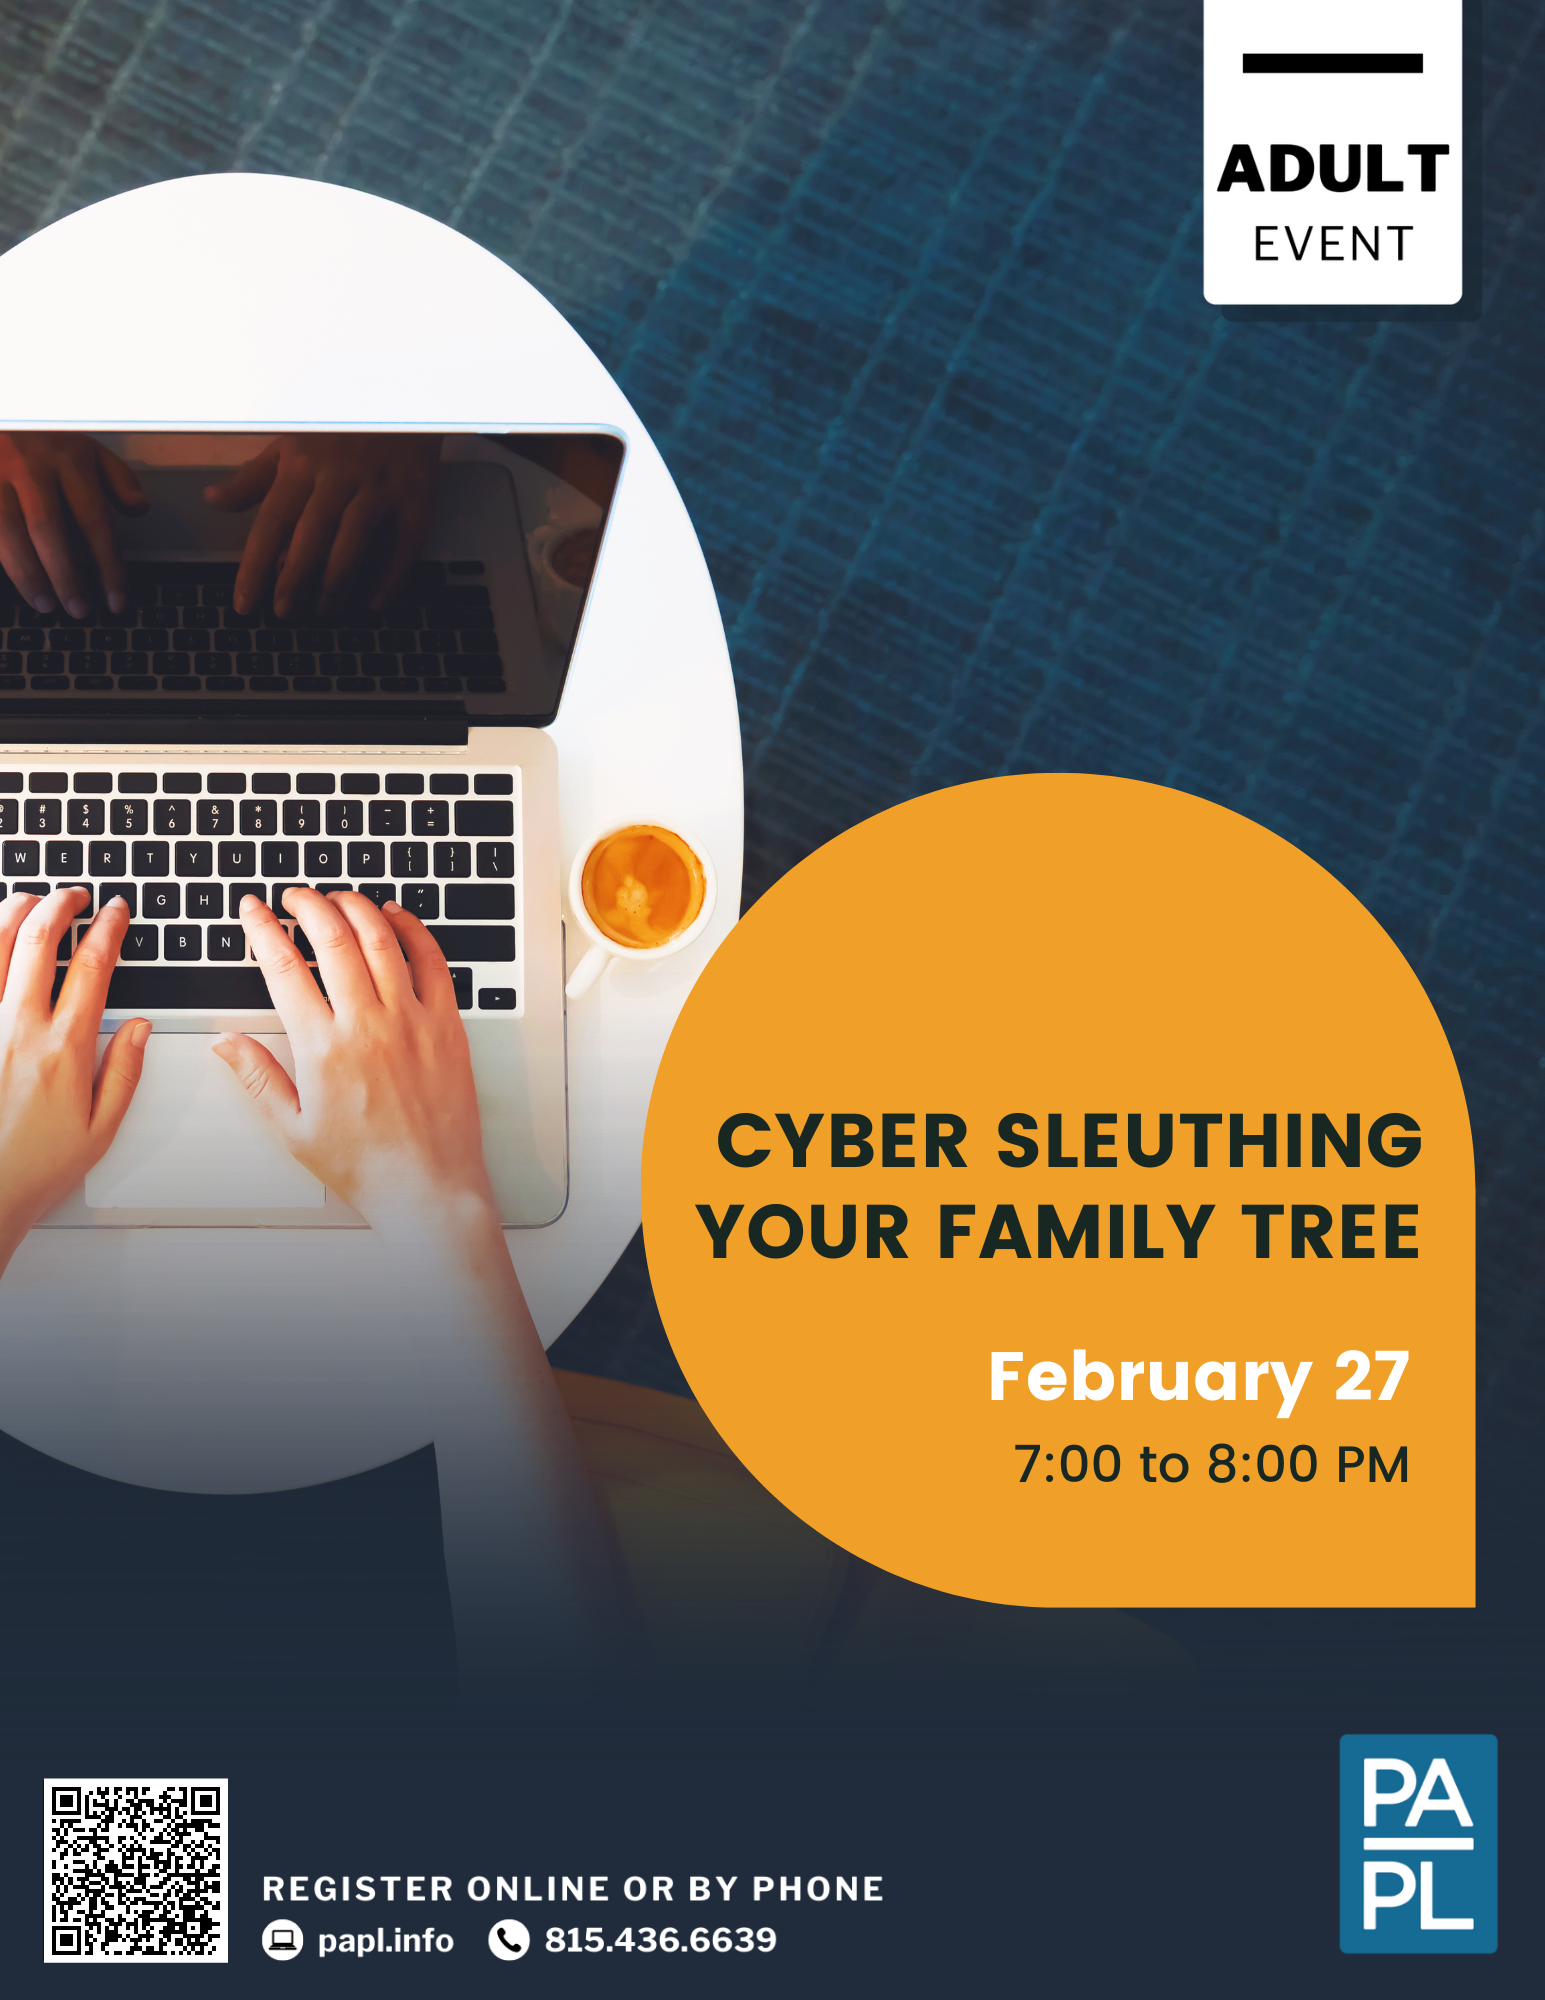 Cyber Sleuthing Your Family Tree